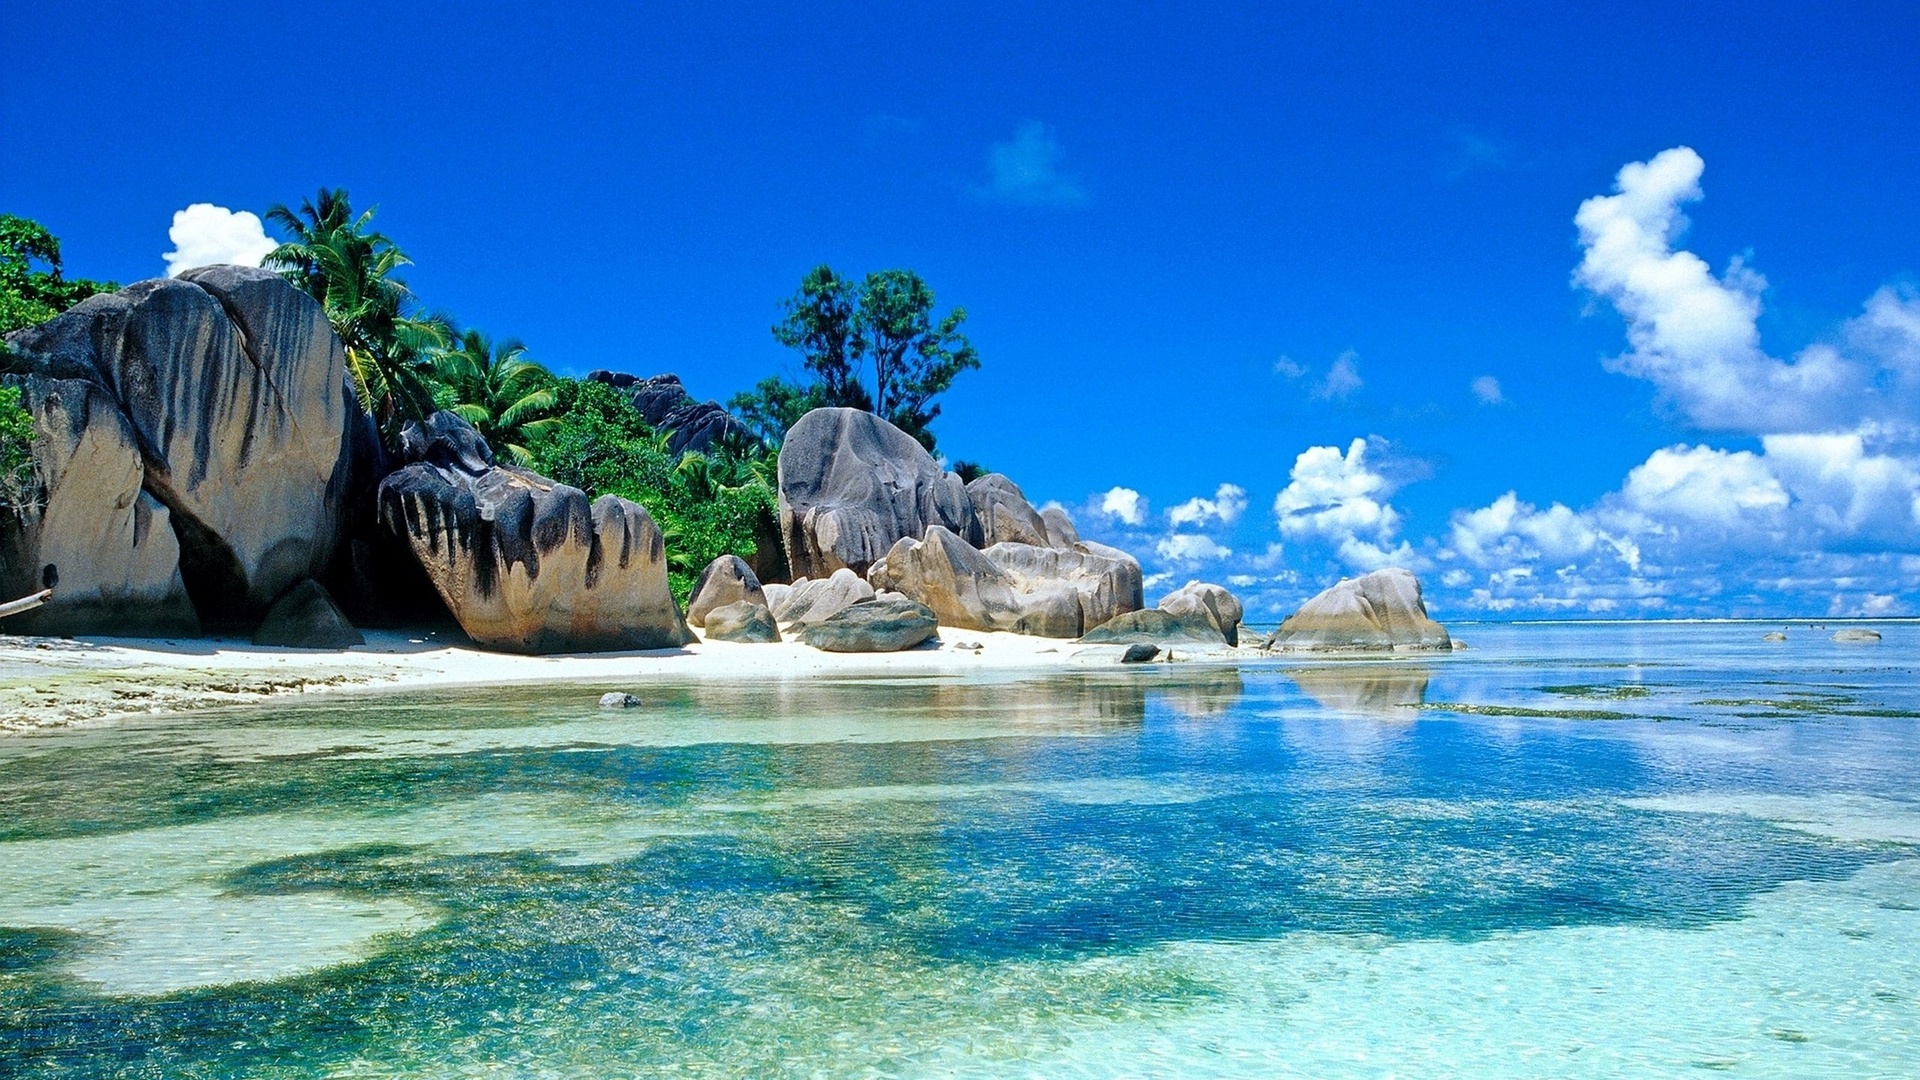 Free Beach Screensavers And Wallpapers Tropical Beach With Large Rocks